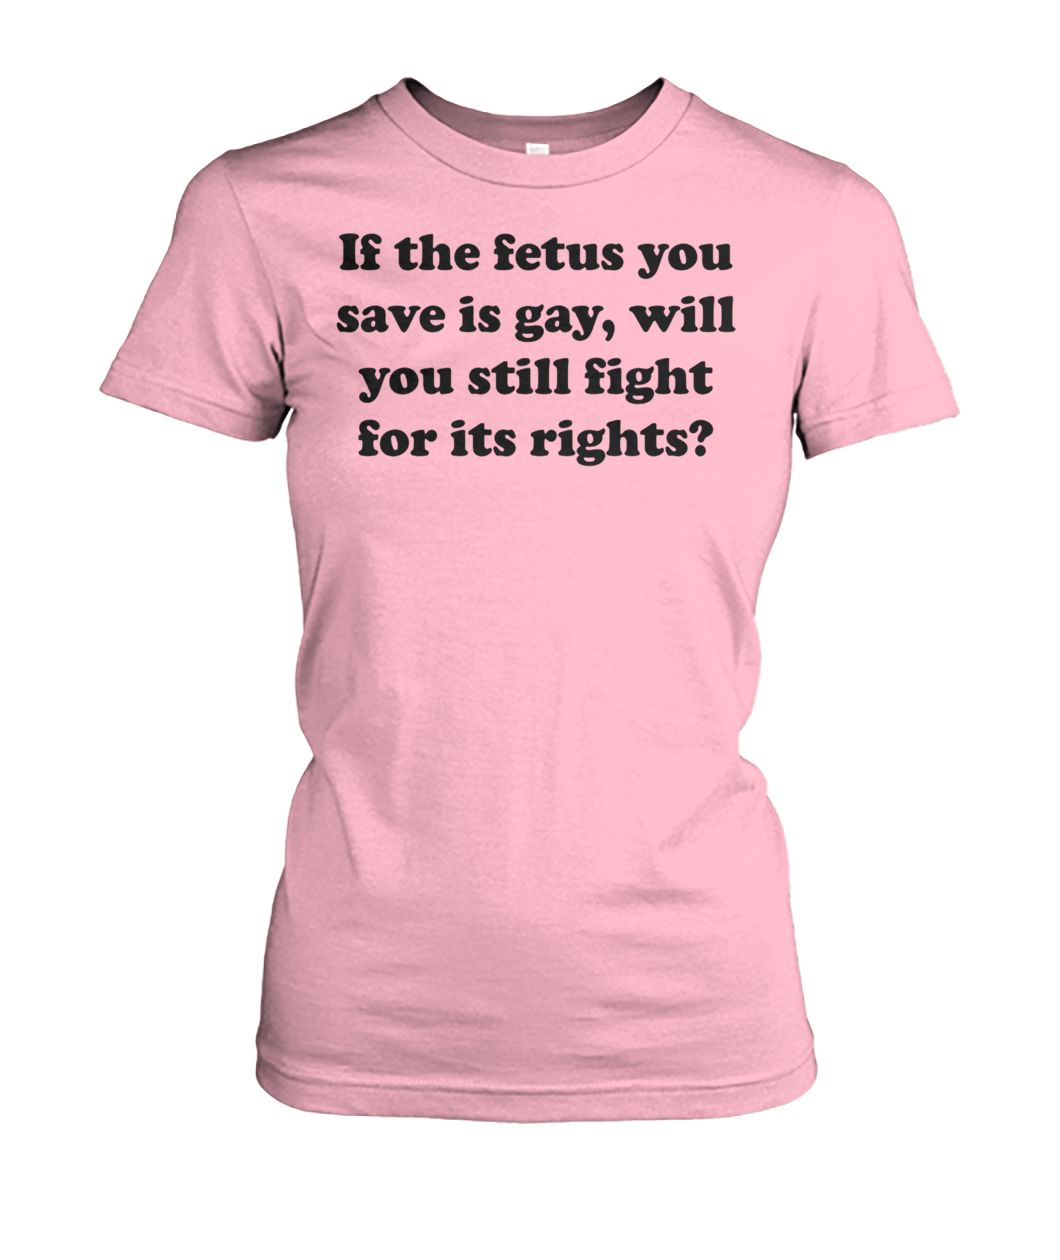 If the fetus you save is gay will you still fight for its rights women's crew tee